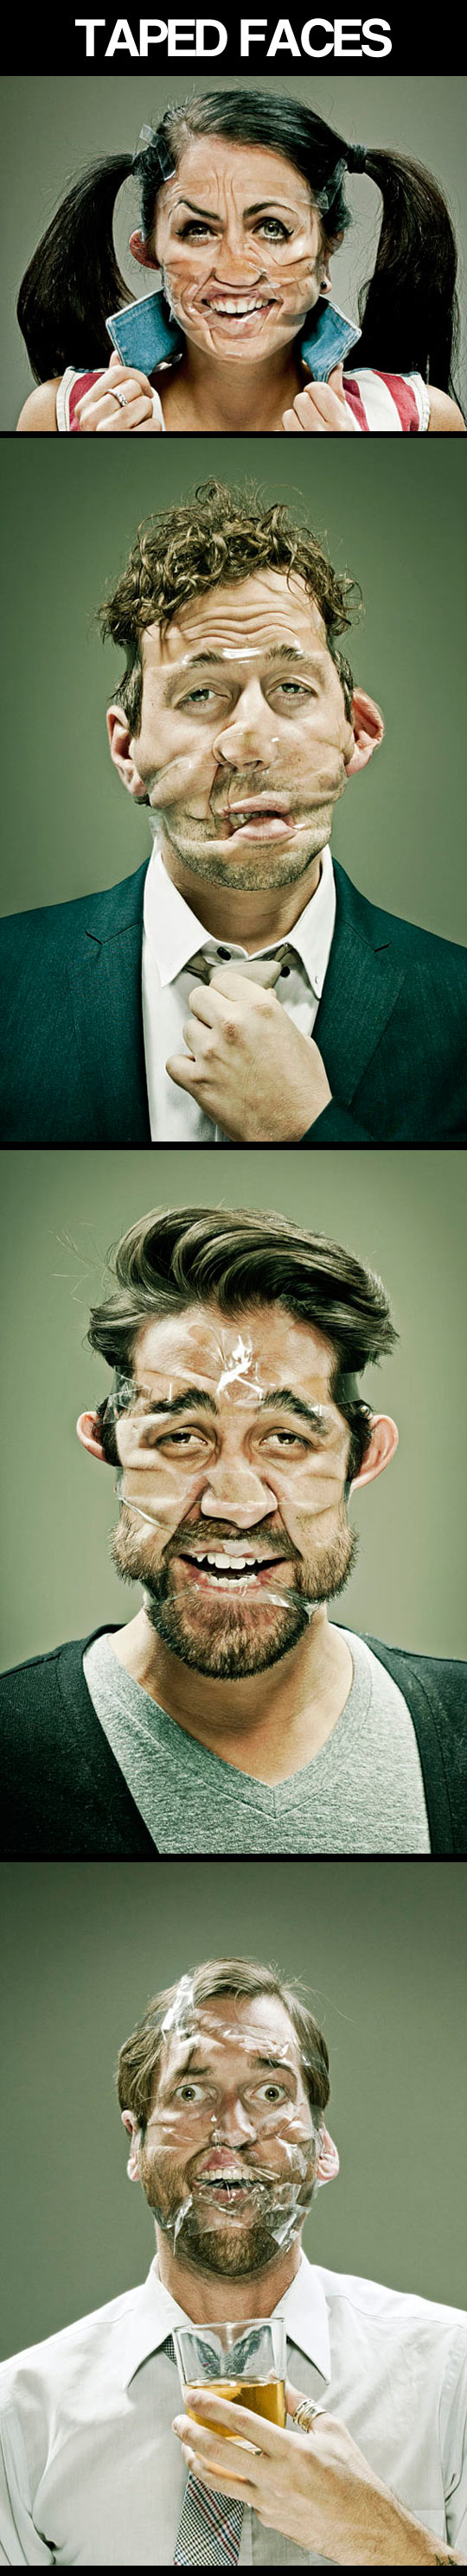 Taped Faces...